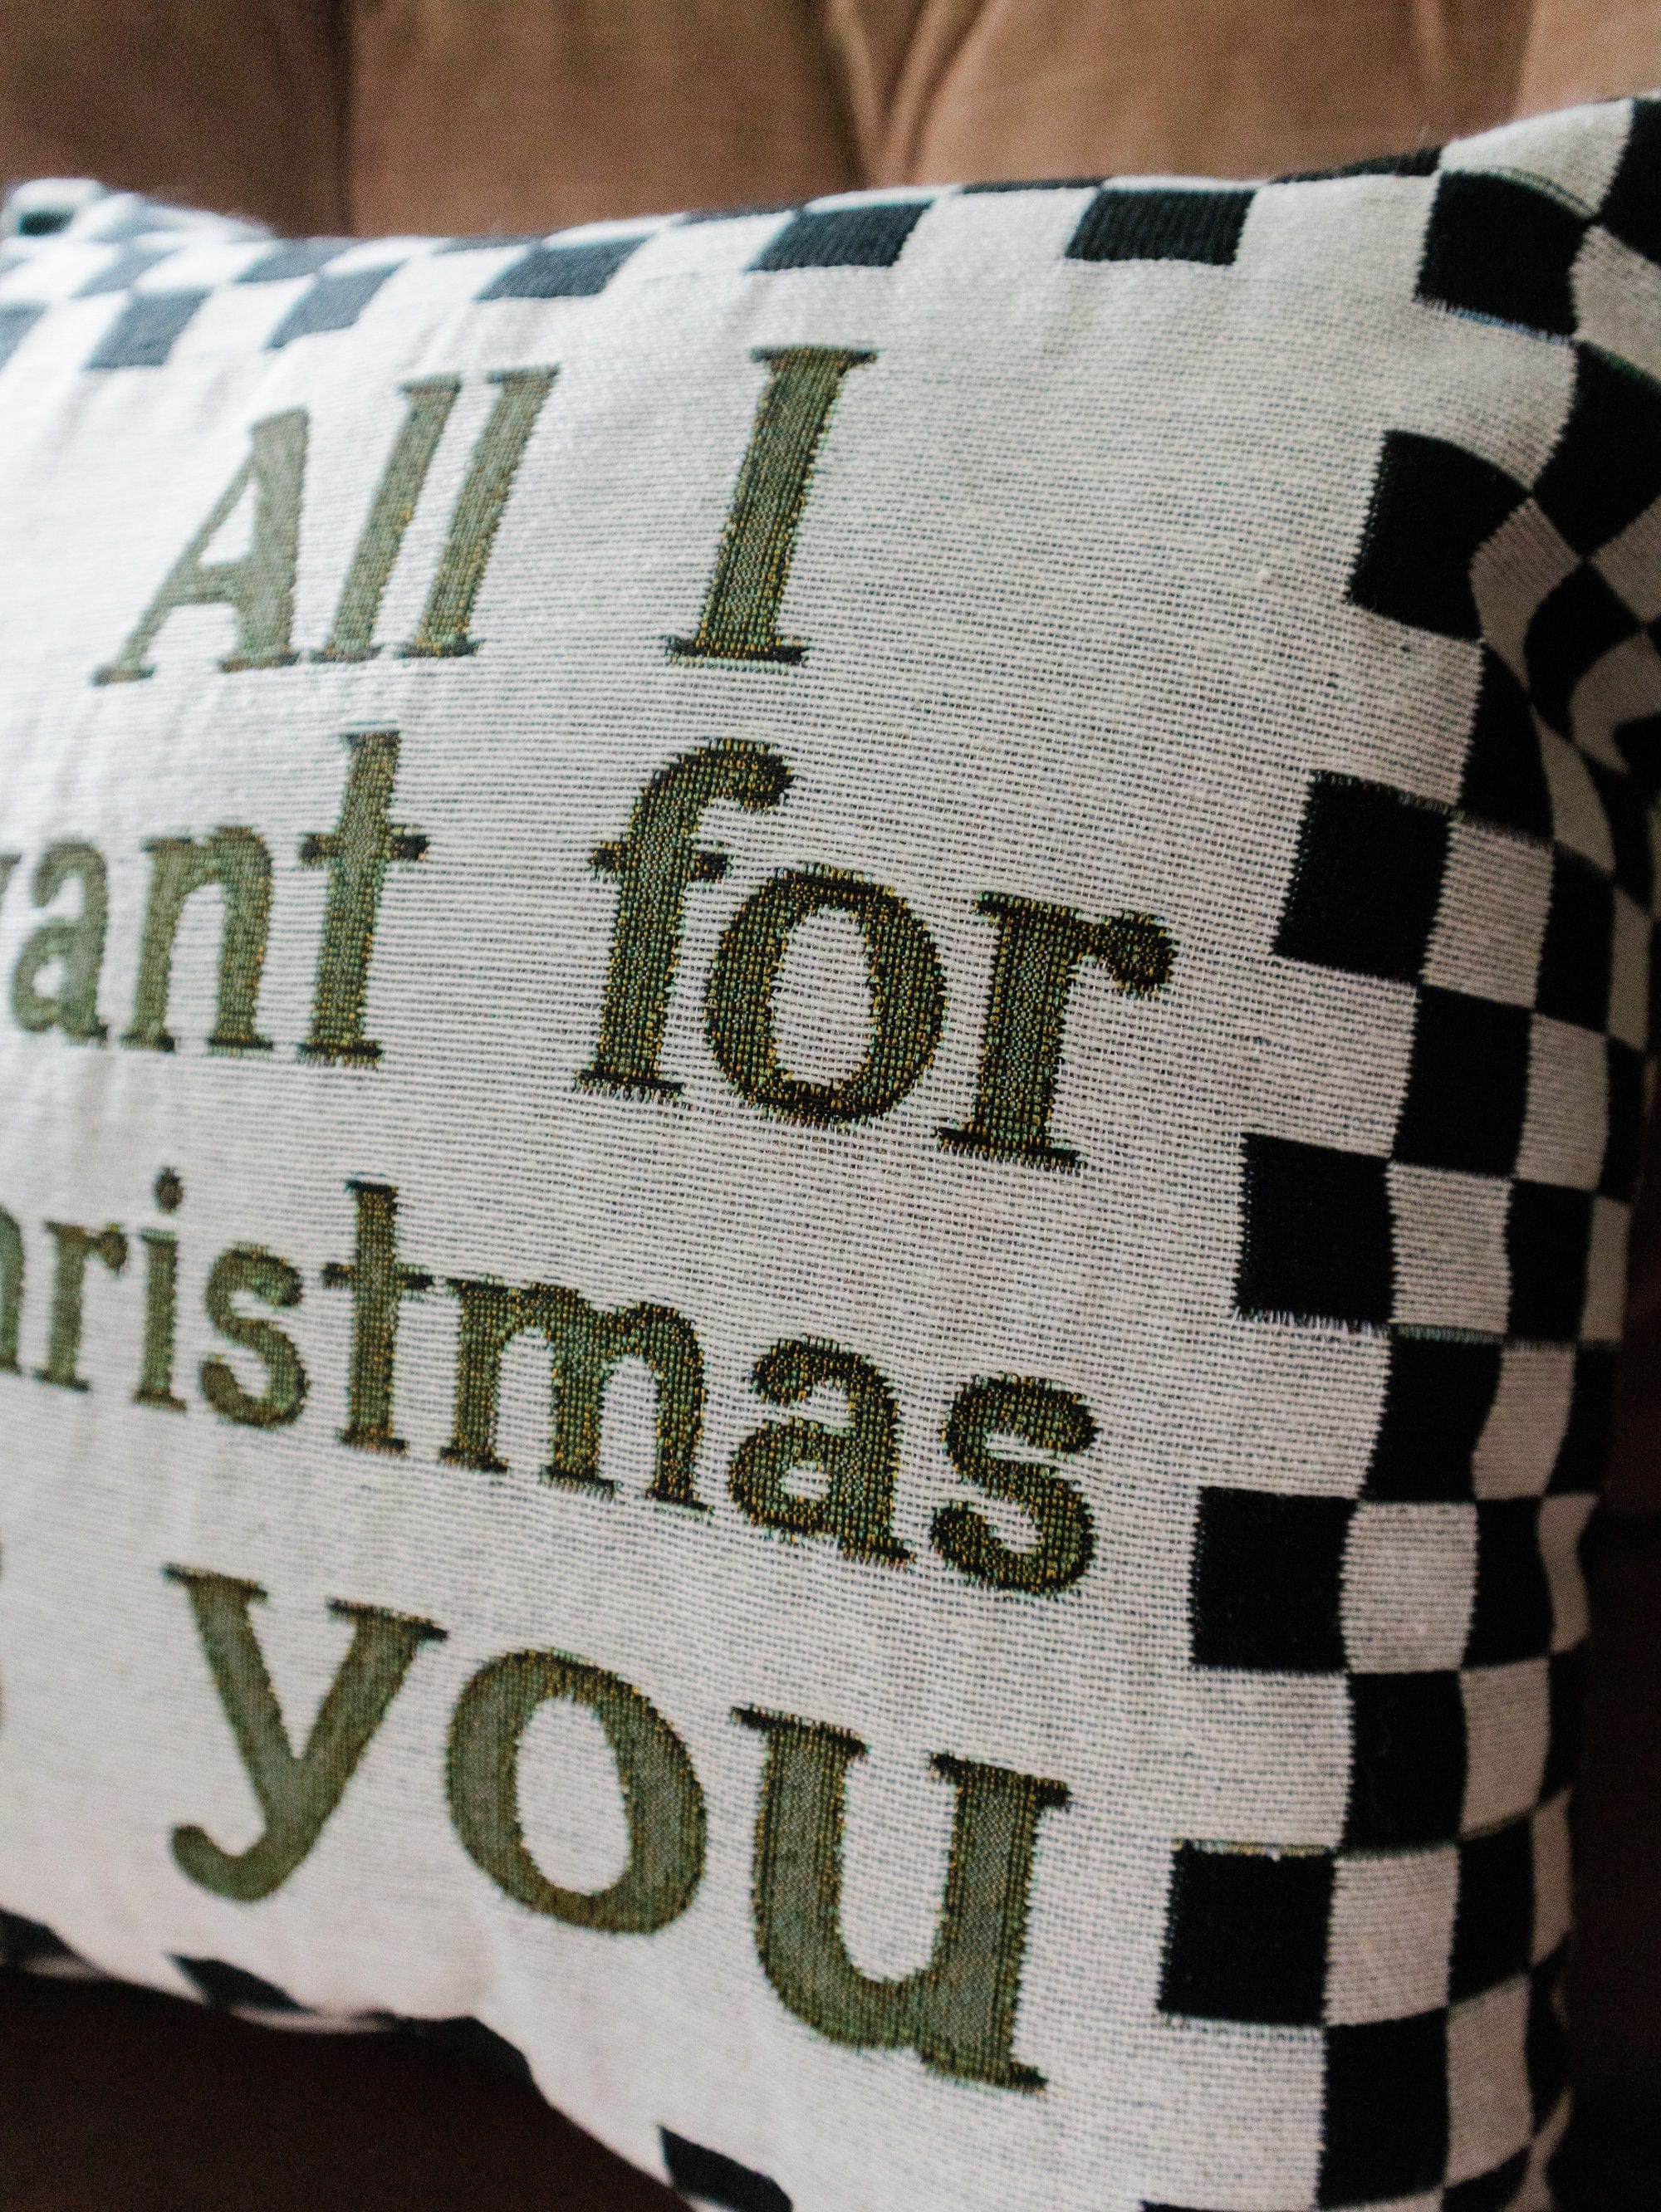 Christmas Pillow: All I Want is You